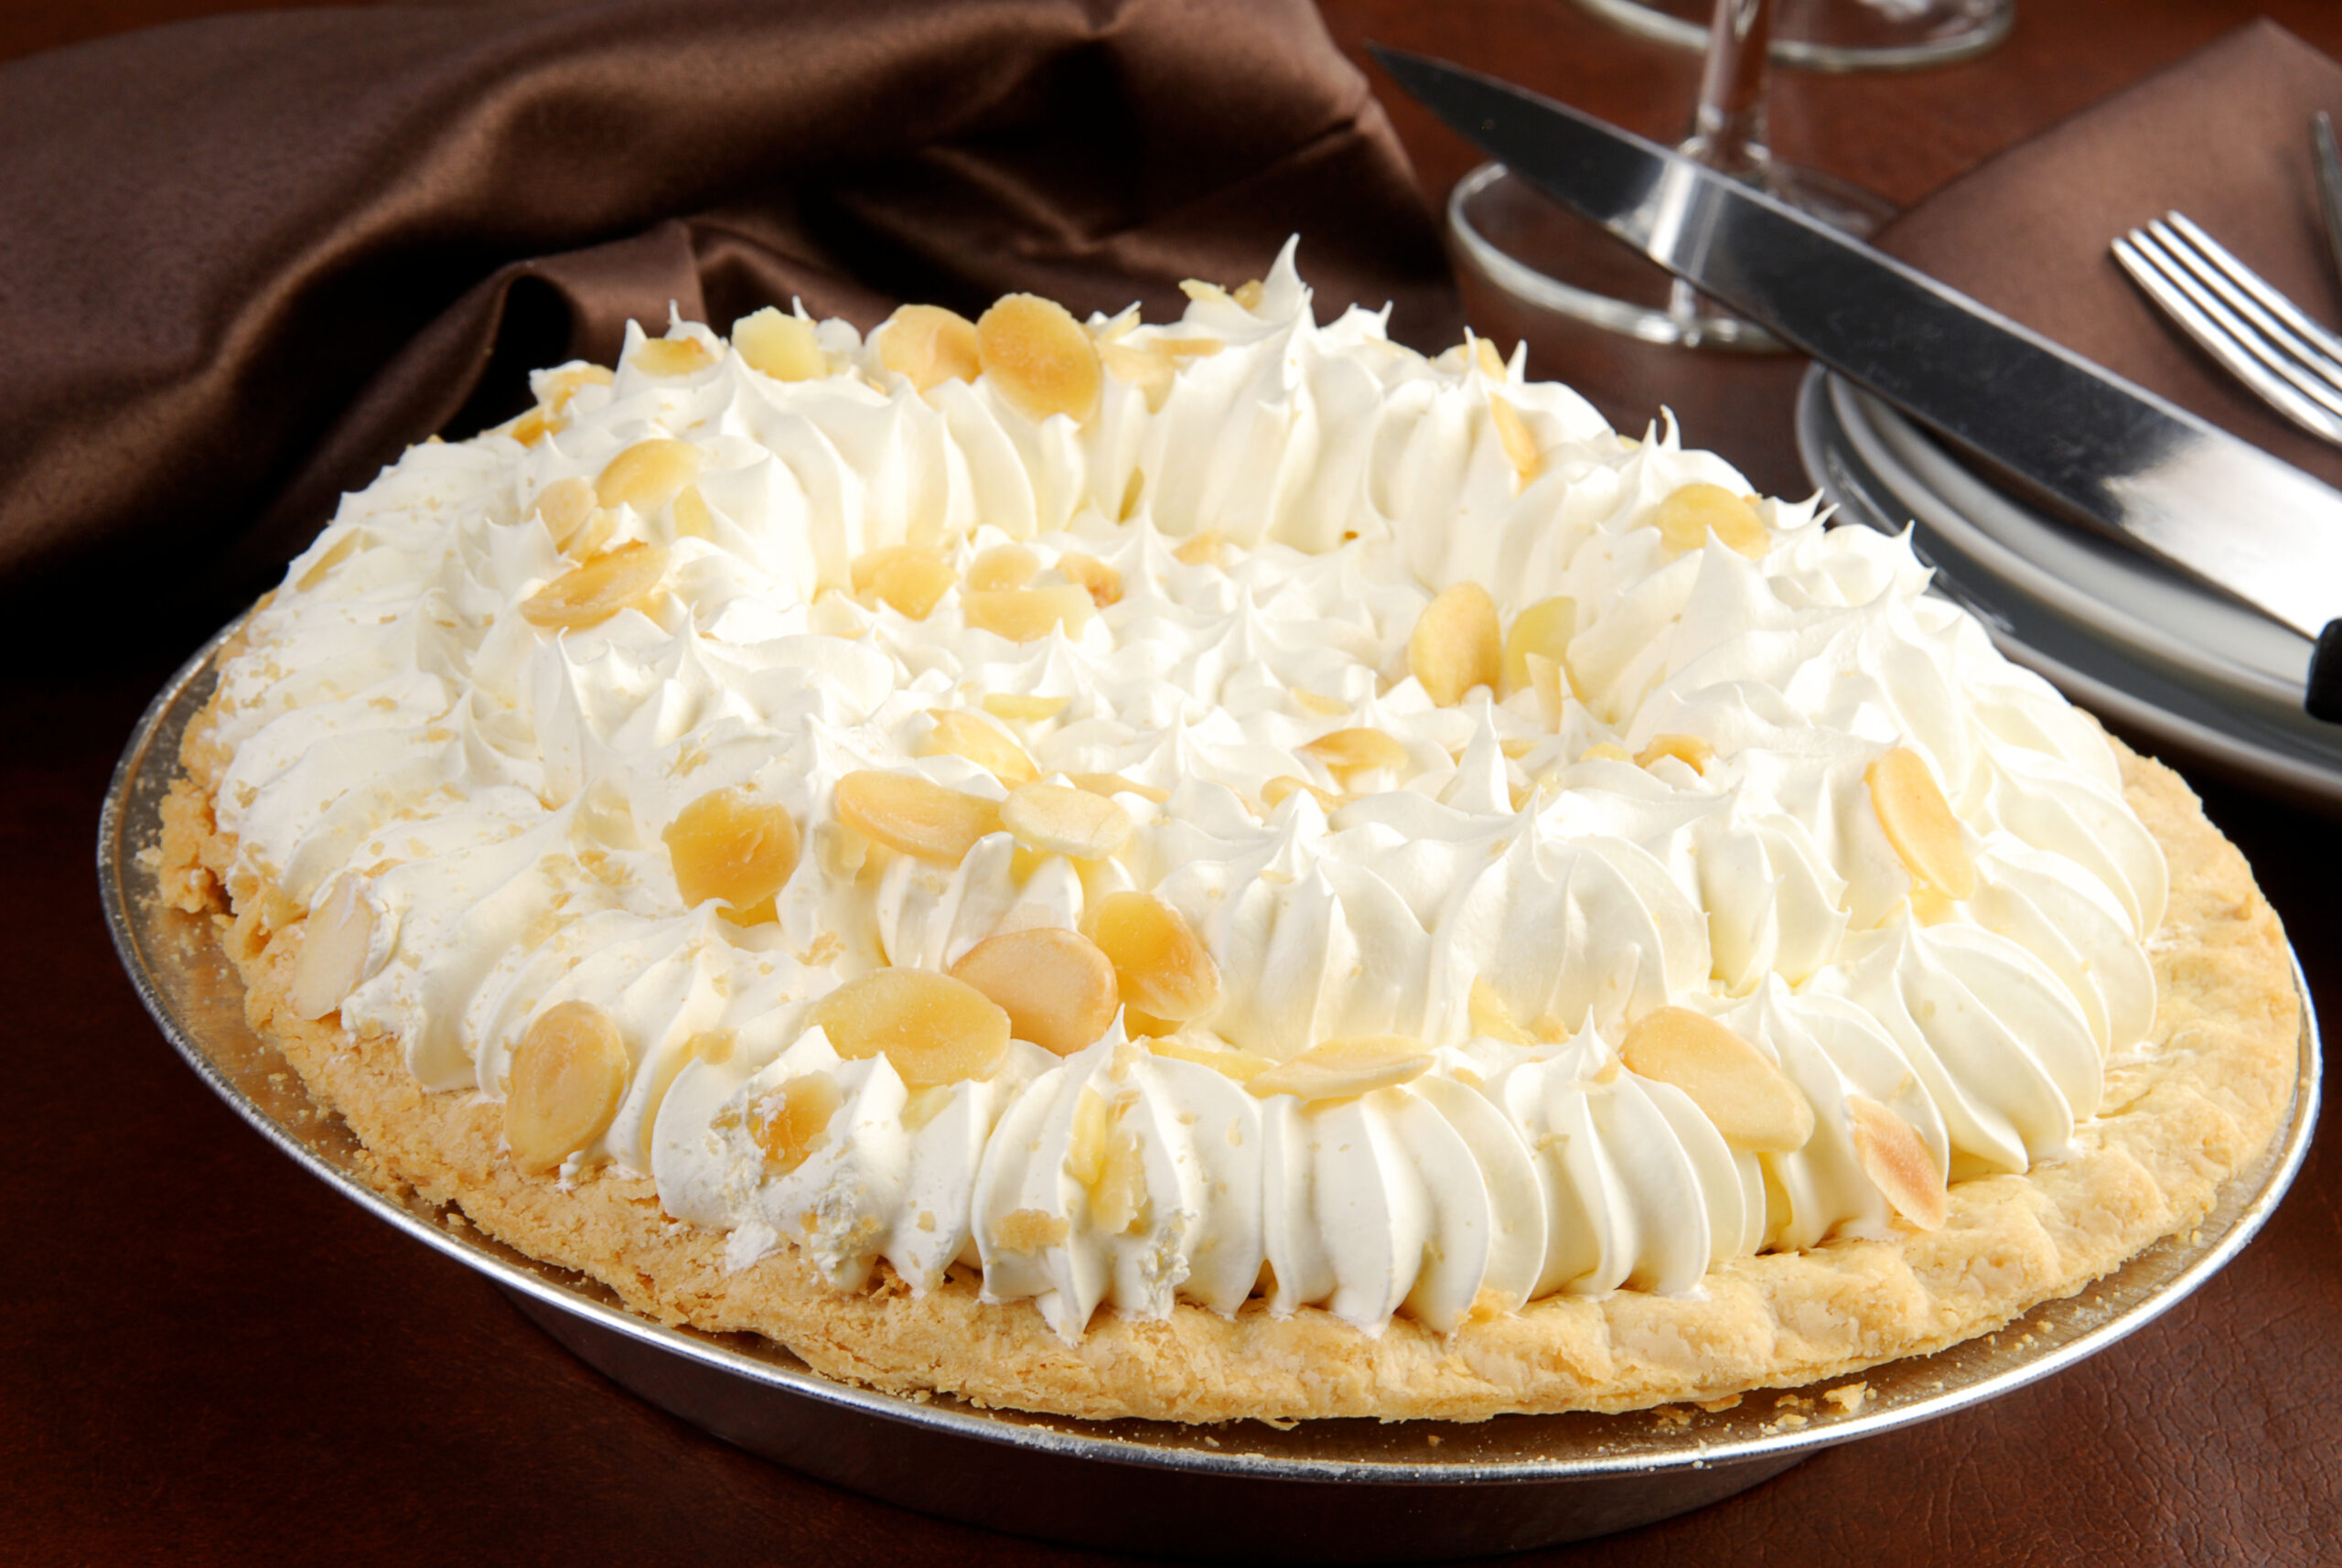 It's National Banana Cream Pie Day! Here's How to Make One PeopleHype